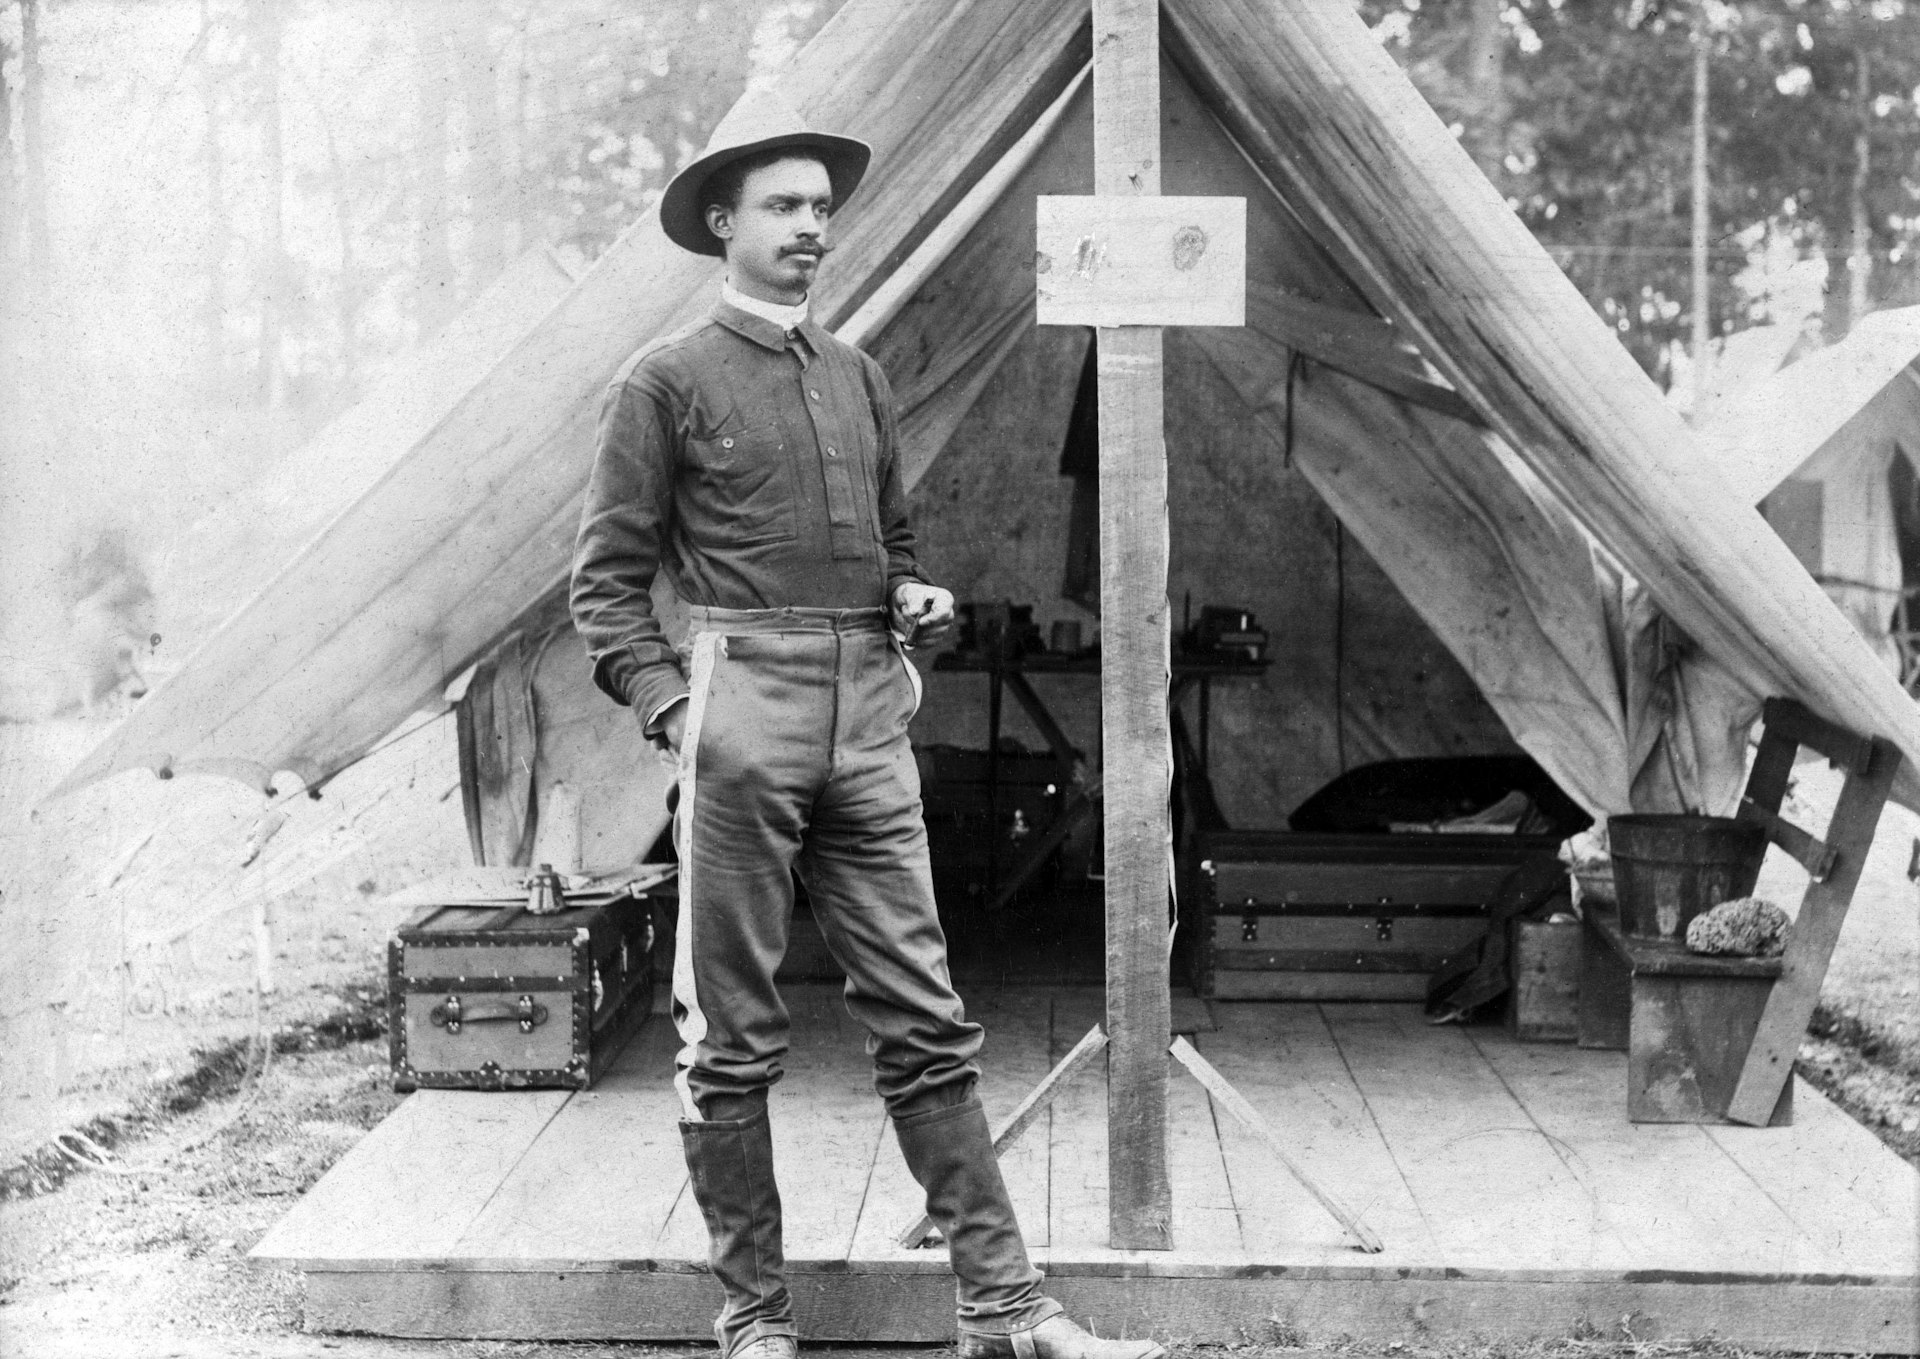 Buffalo soldier. T.R. Clarke, 8th US Volunteer Infantry, standing in front of tent, during the Spanish-American War. ca. 1898